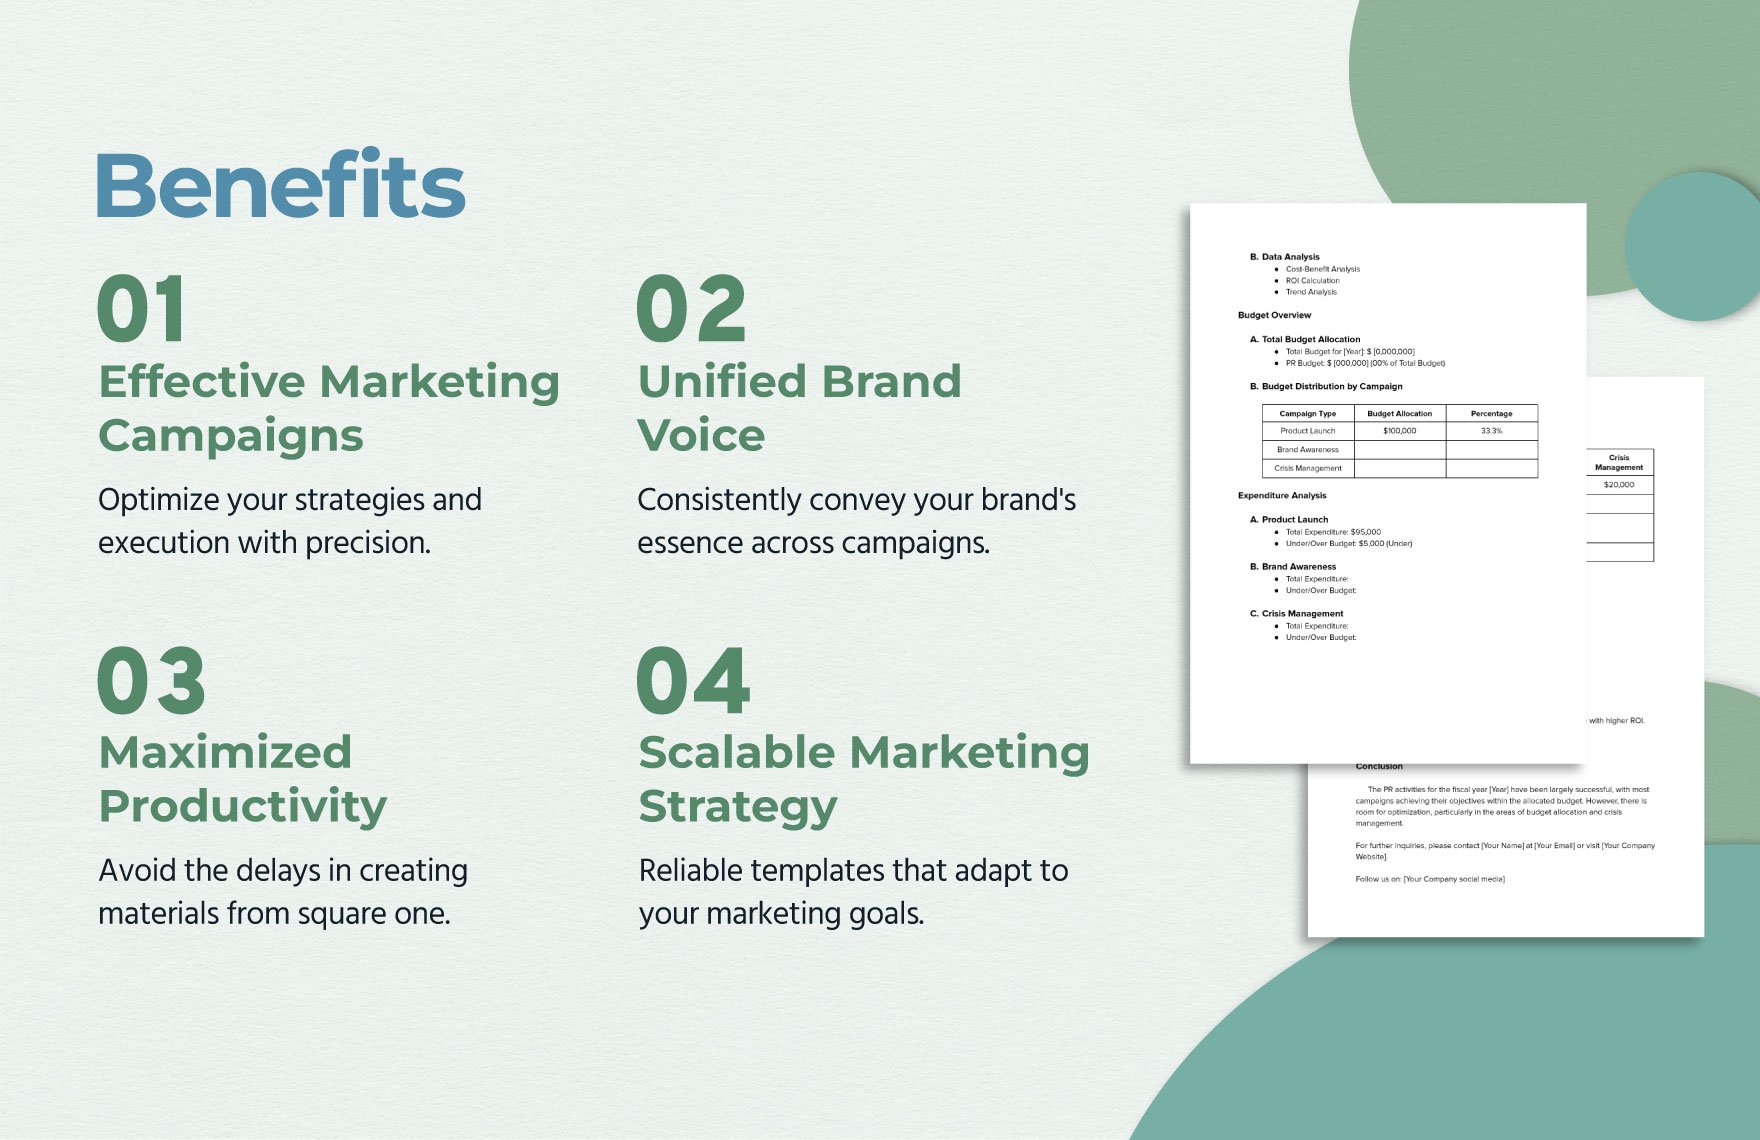 Marketing Public Relations Spend Report Template